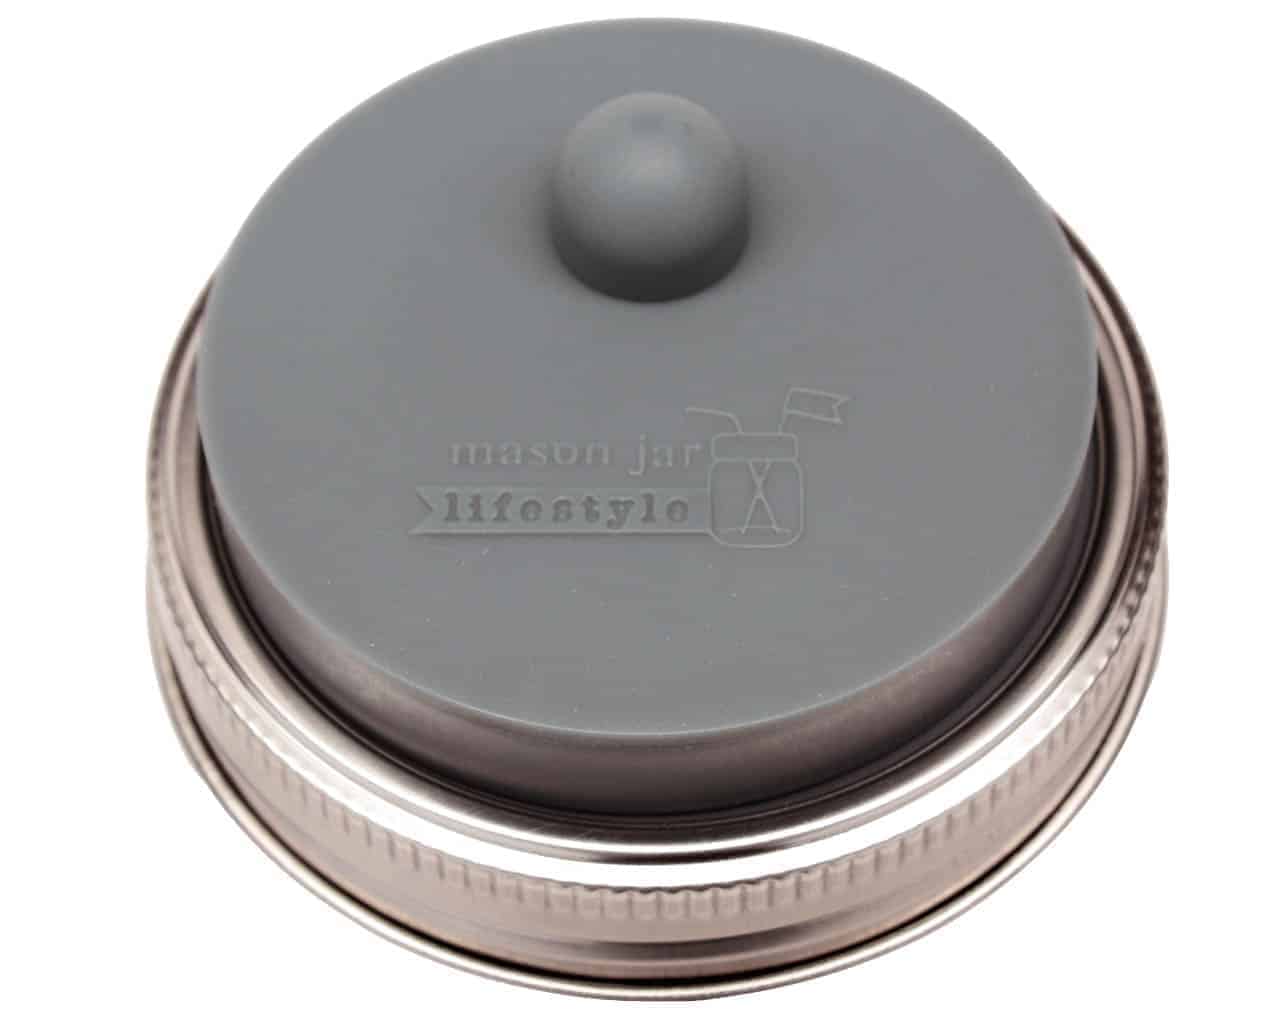 Charcoal gray silicone fermentation valve lid with stainless steel band for lacto fermenting in wide mouth Mason jars